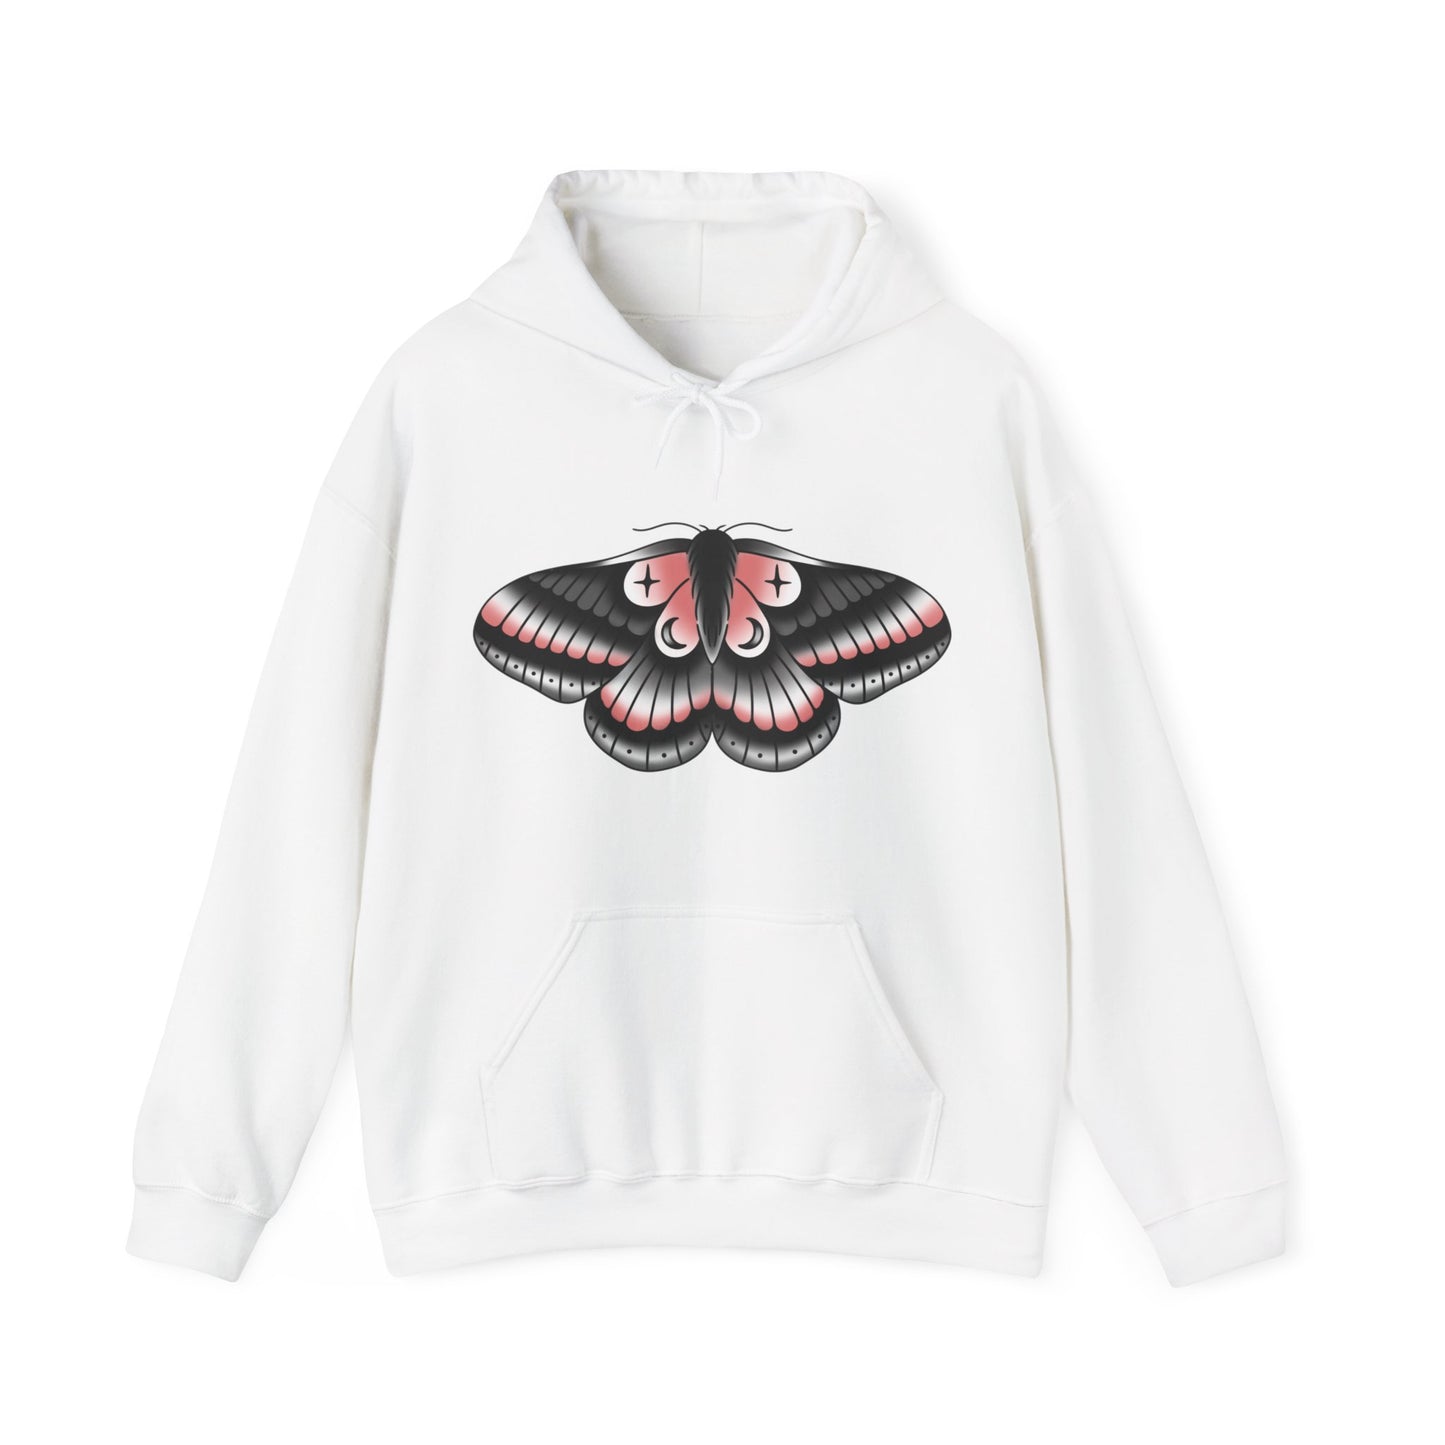 Drawn to the flame Hooded Sweatshirt